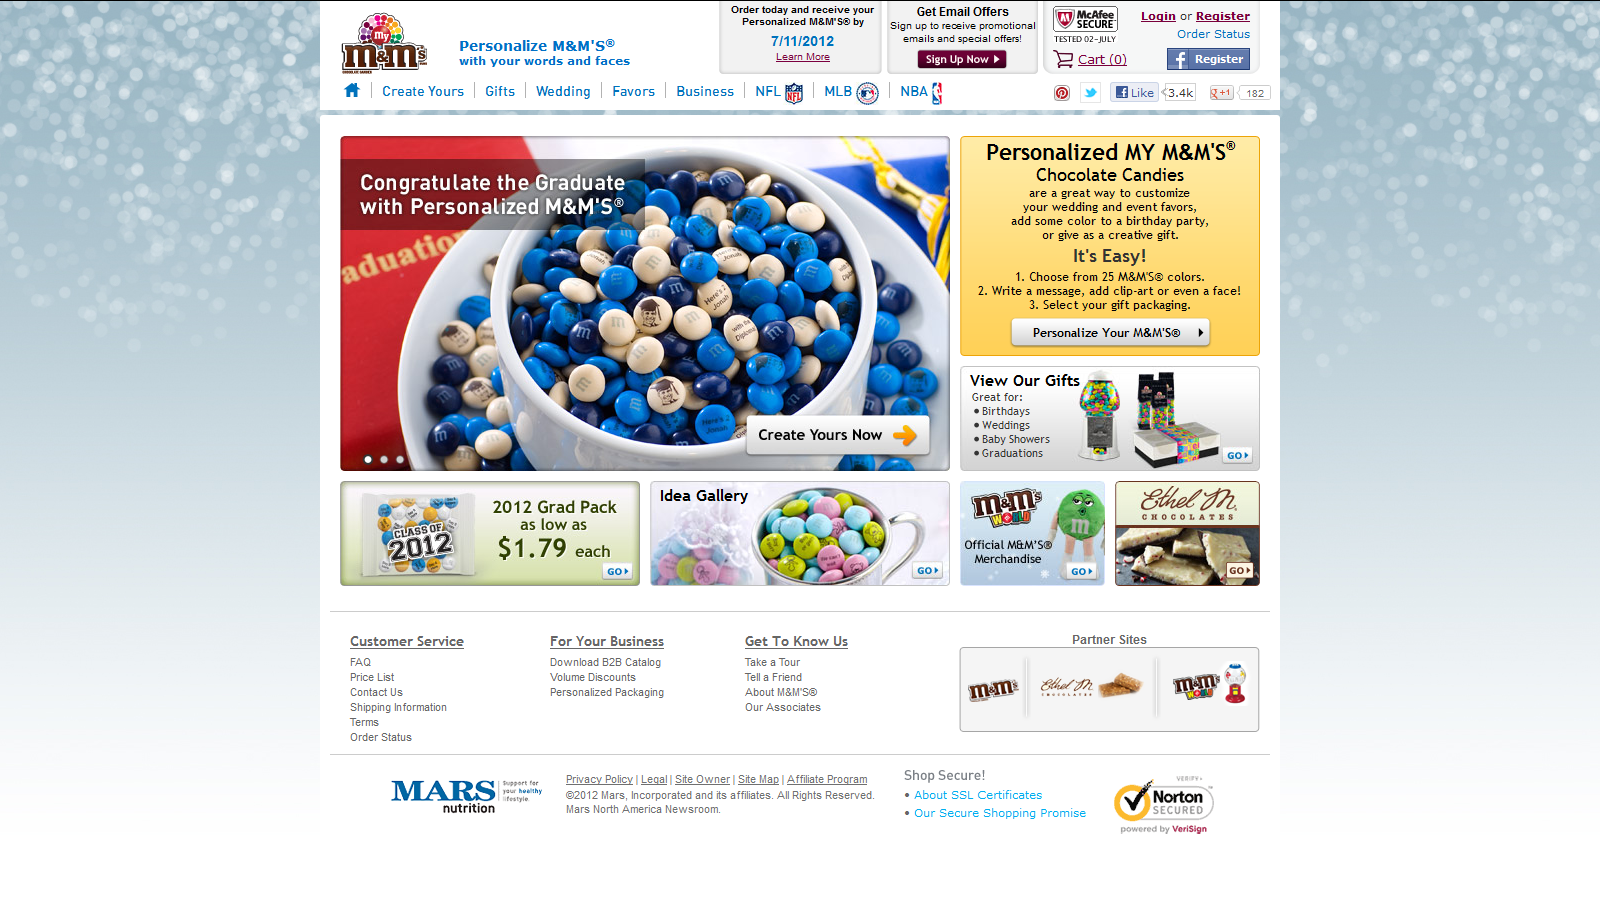 My M&M's Coupons & Promo Codes!